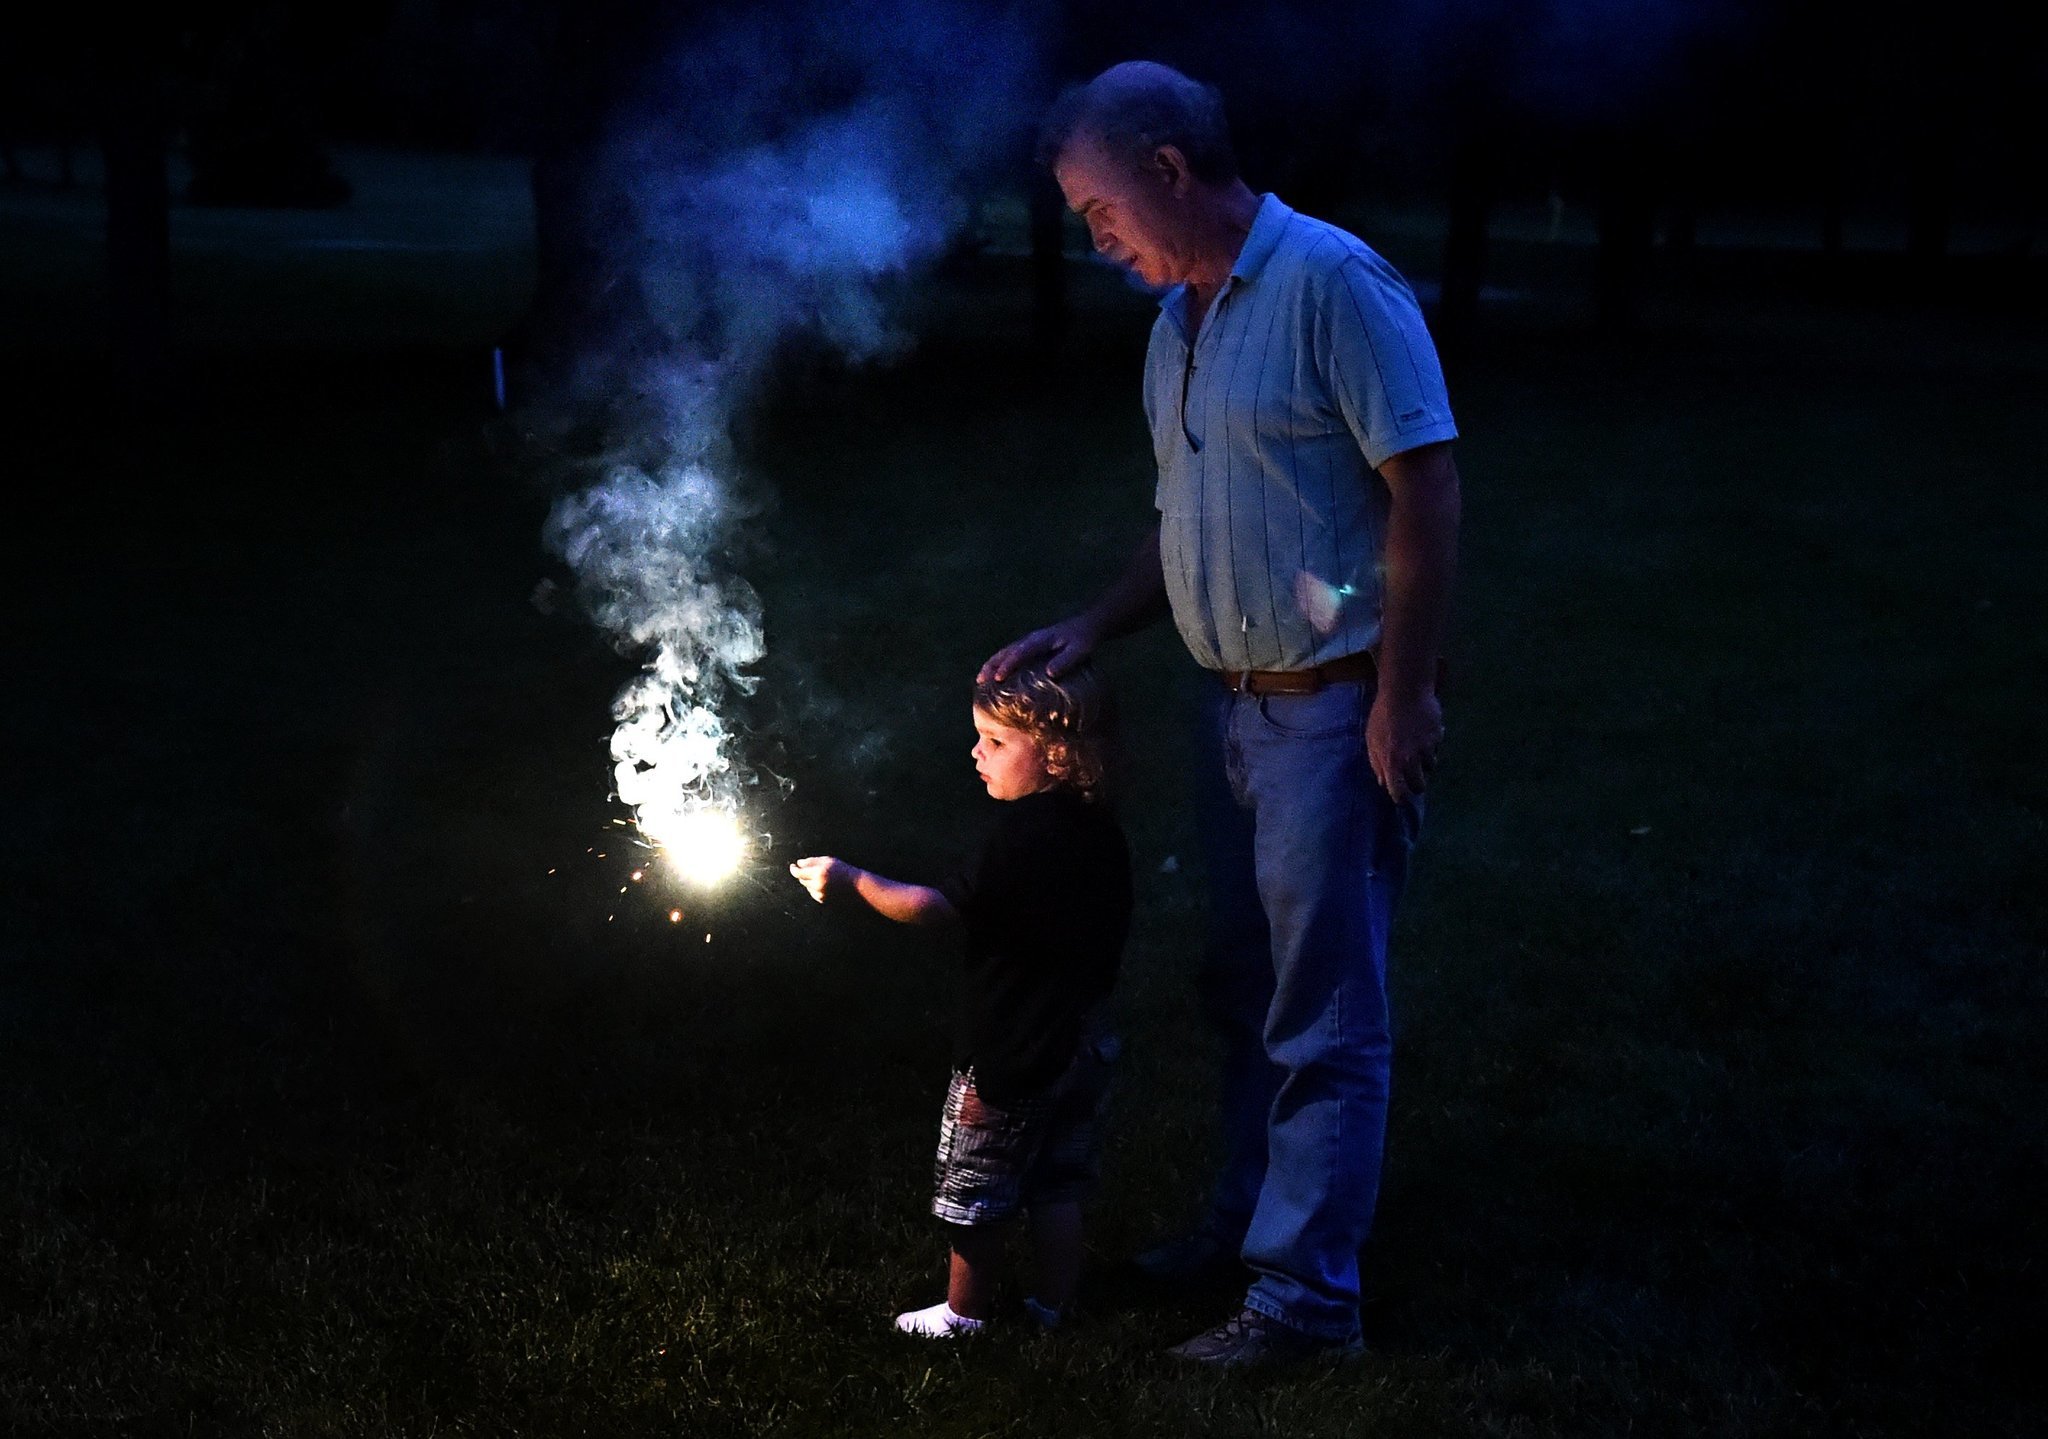 4th of July 2017 sparklers guide: Where to buy small fireworks in New York state (Search 1,000 vendors)